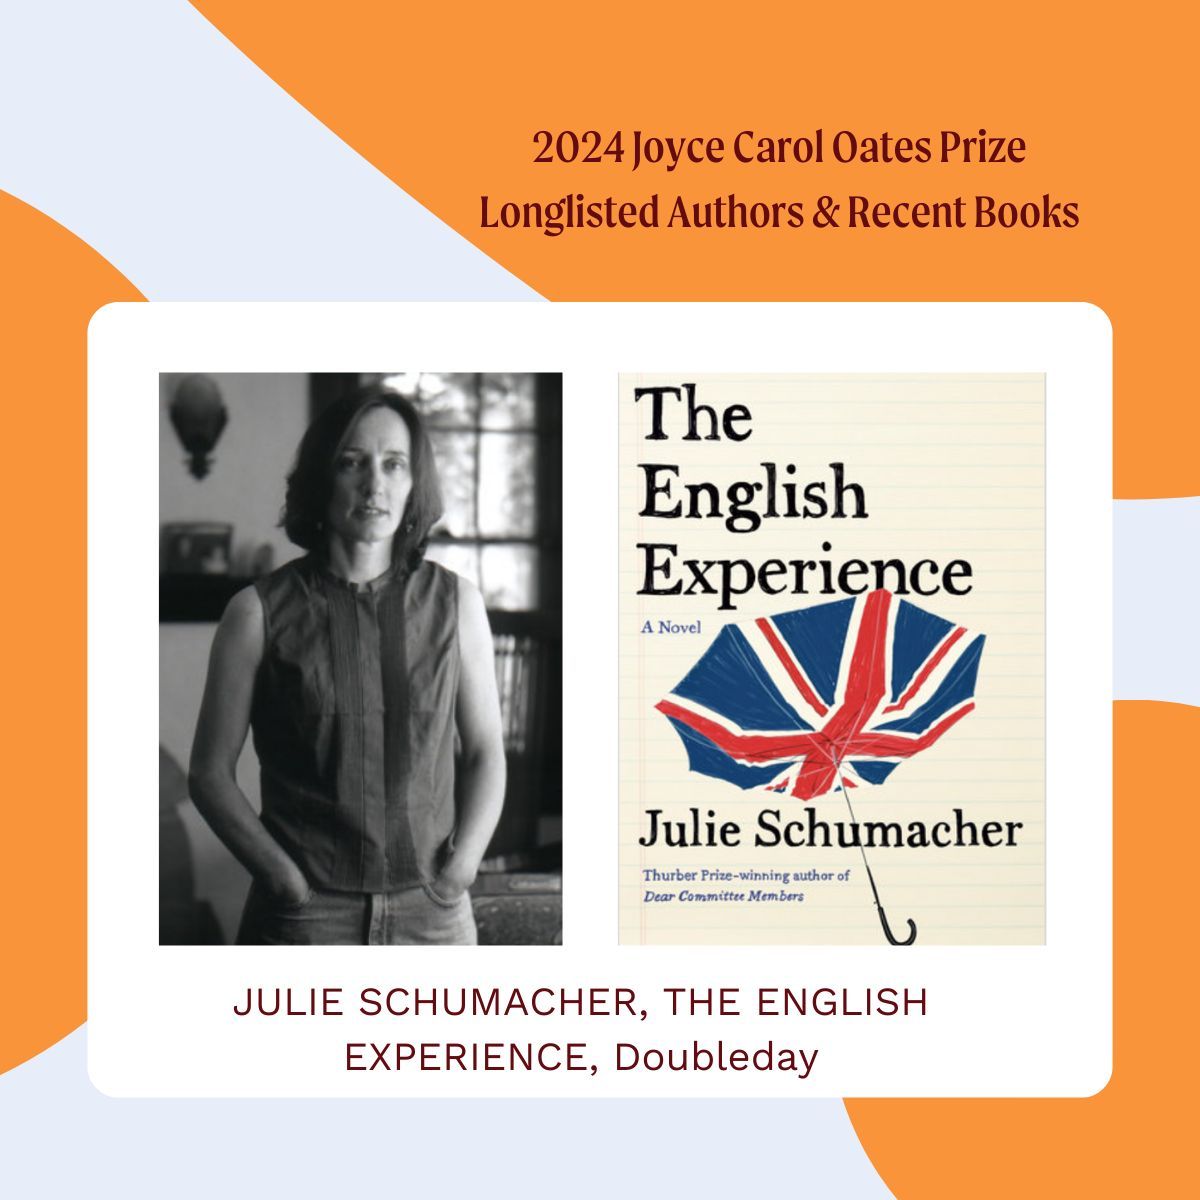 Congratulations to Julie Shumacher. Kirkus Reviews calls The English Experience, the final book in her trilogy, 'a satirical recipe that manages to turn sour, mismatched ingredients into something feather-light, affable, and sweet.'